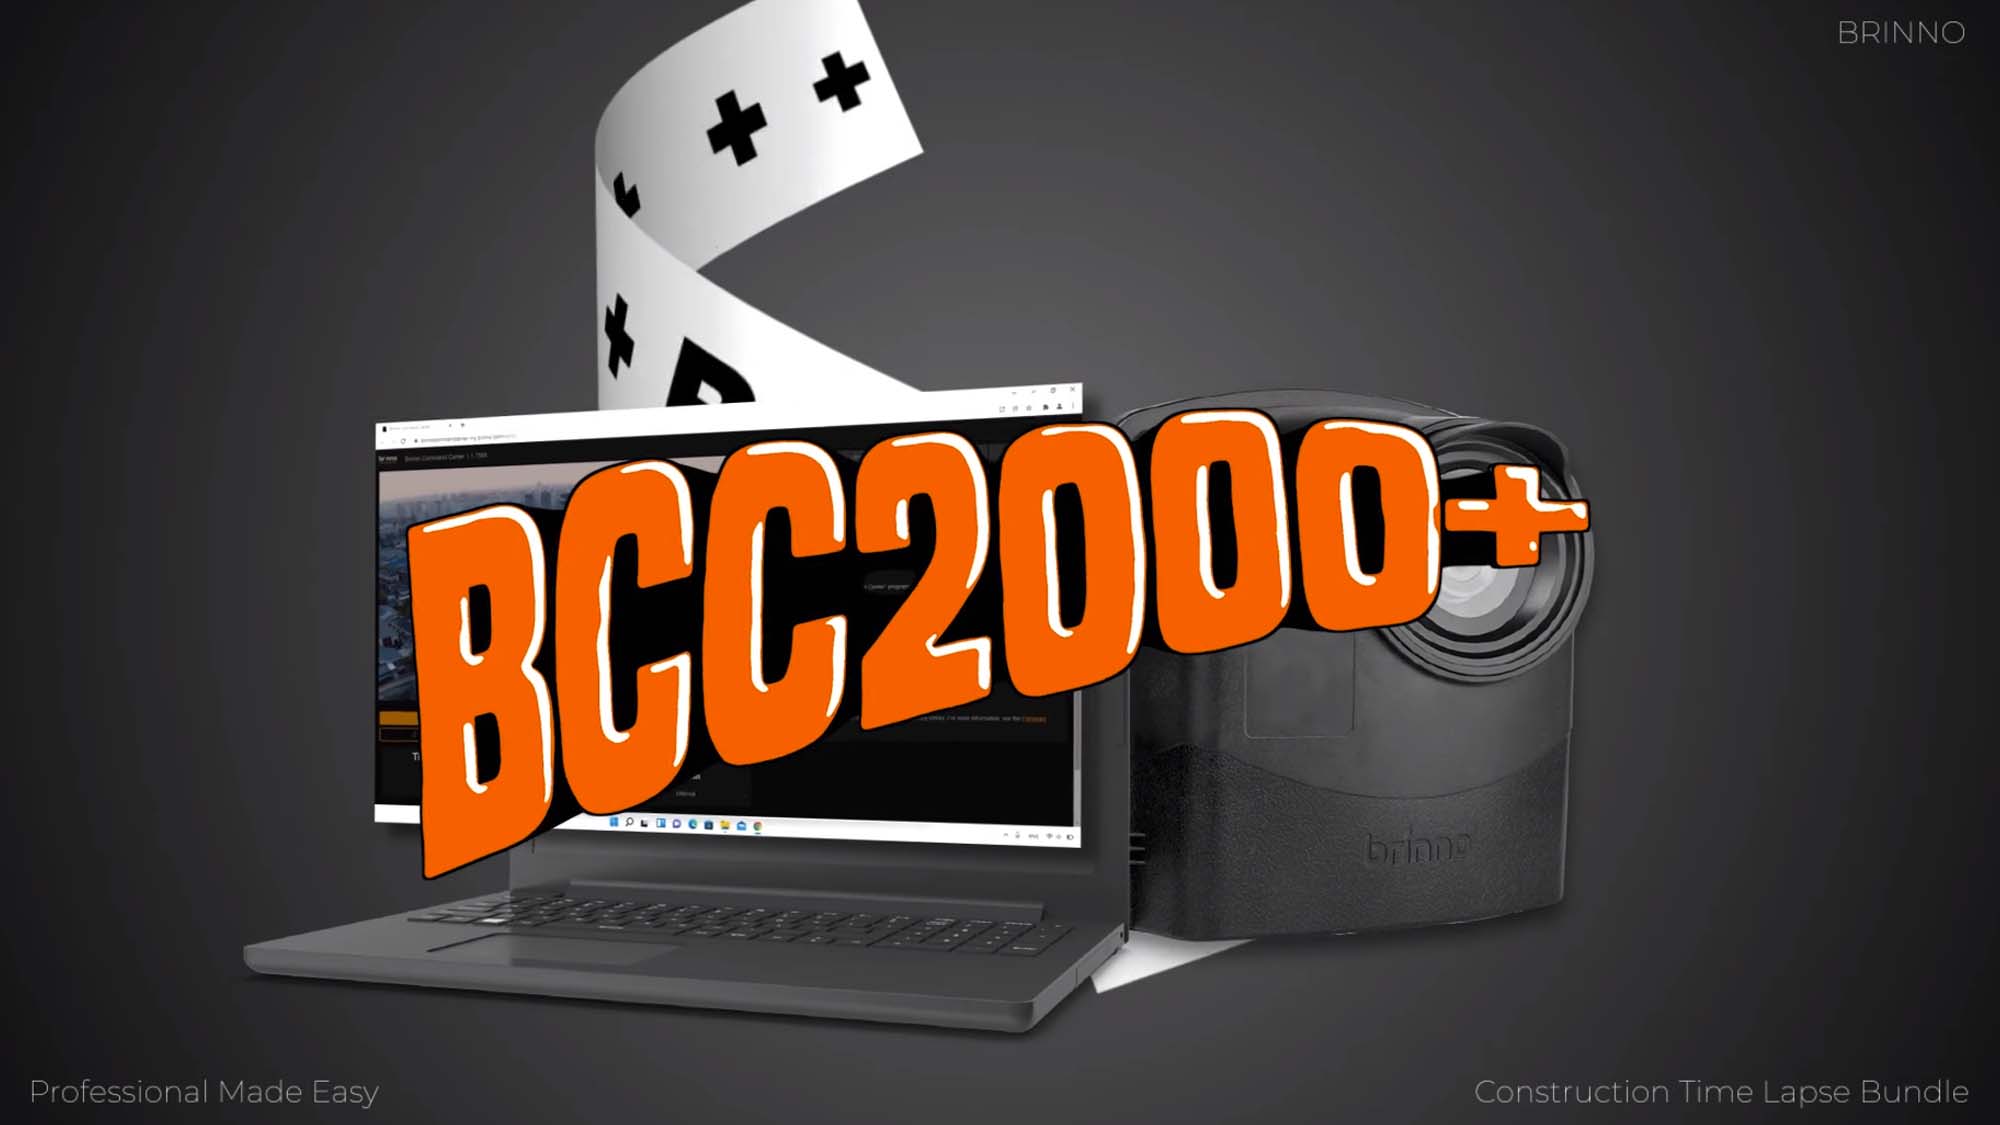 BCC2000PLUS-pitch-video-cover